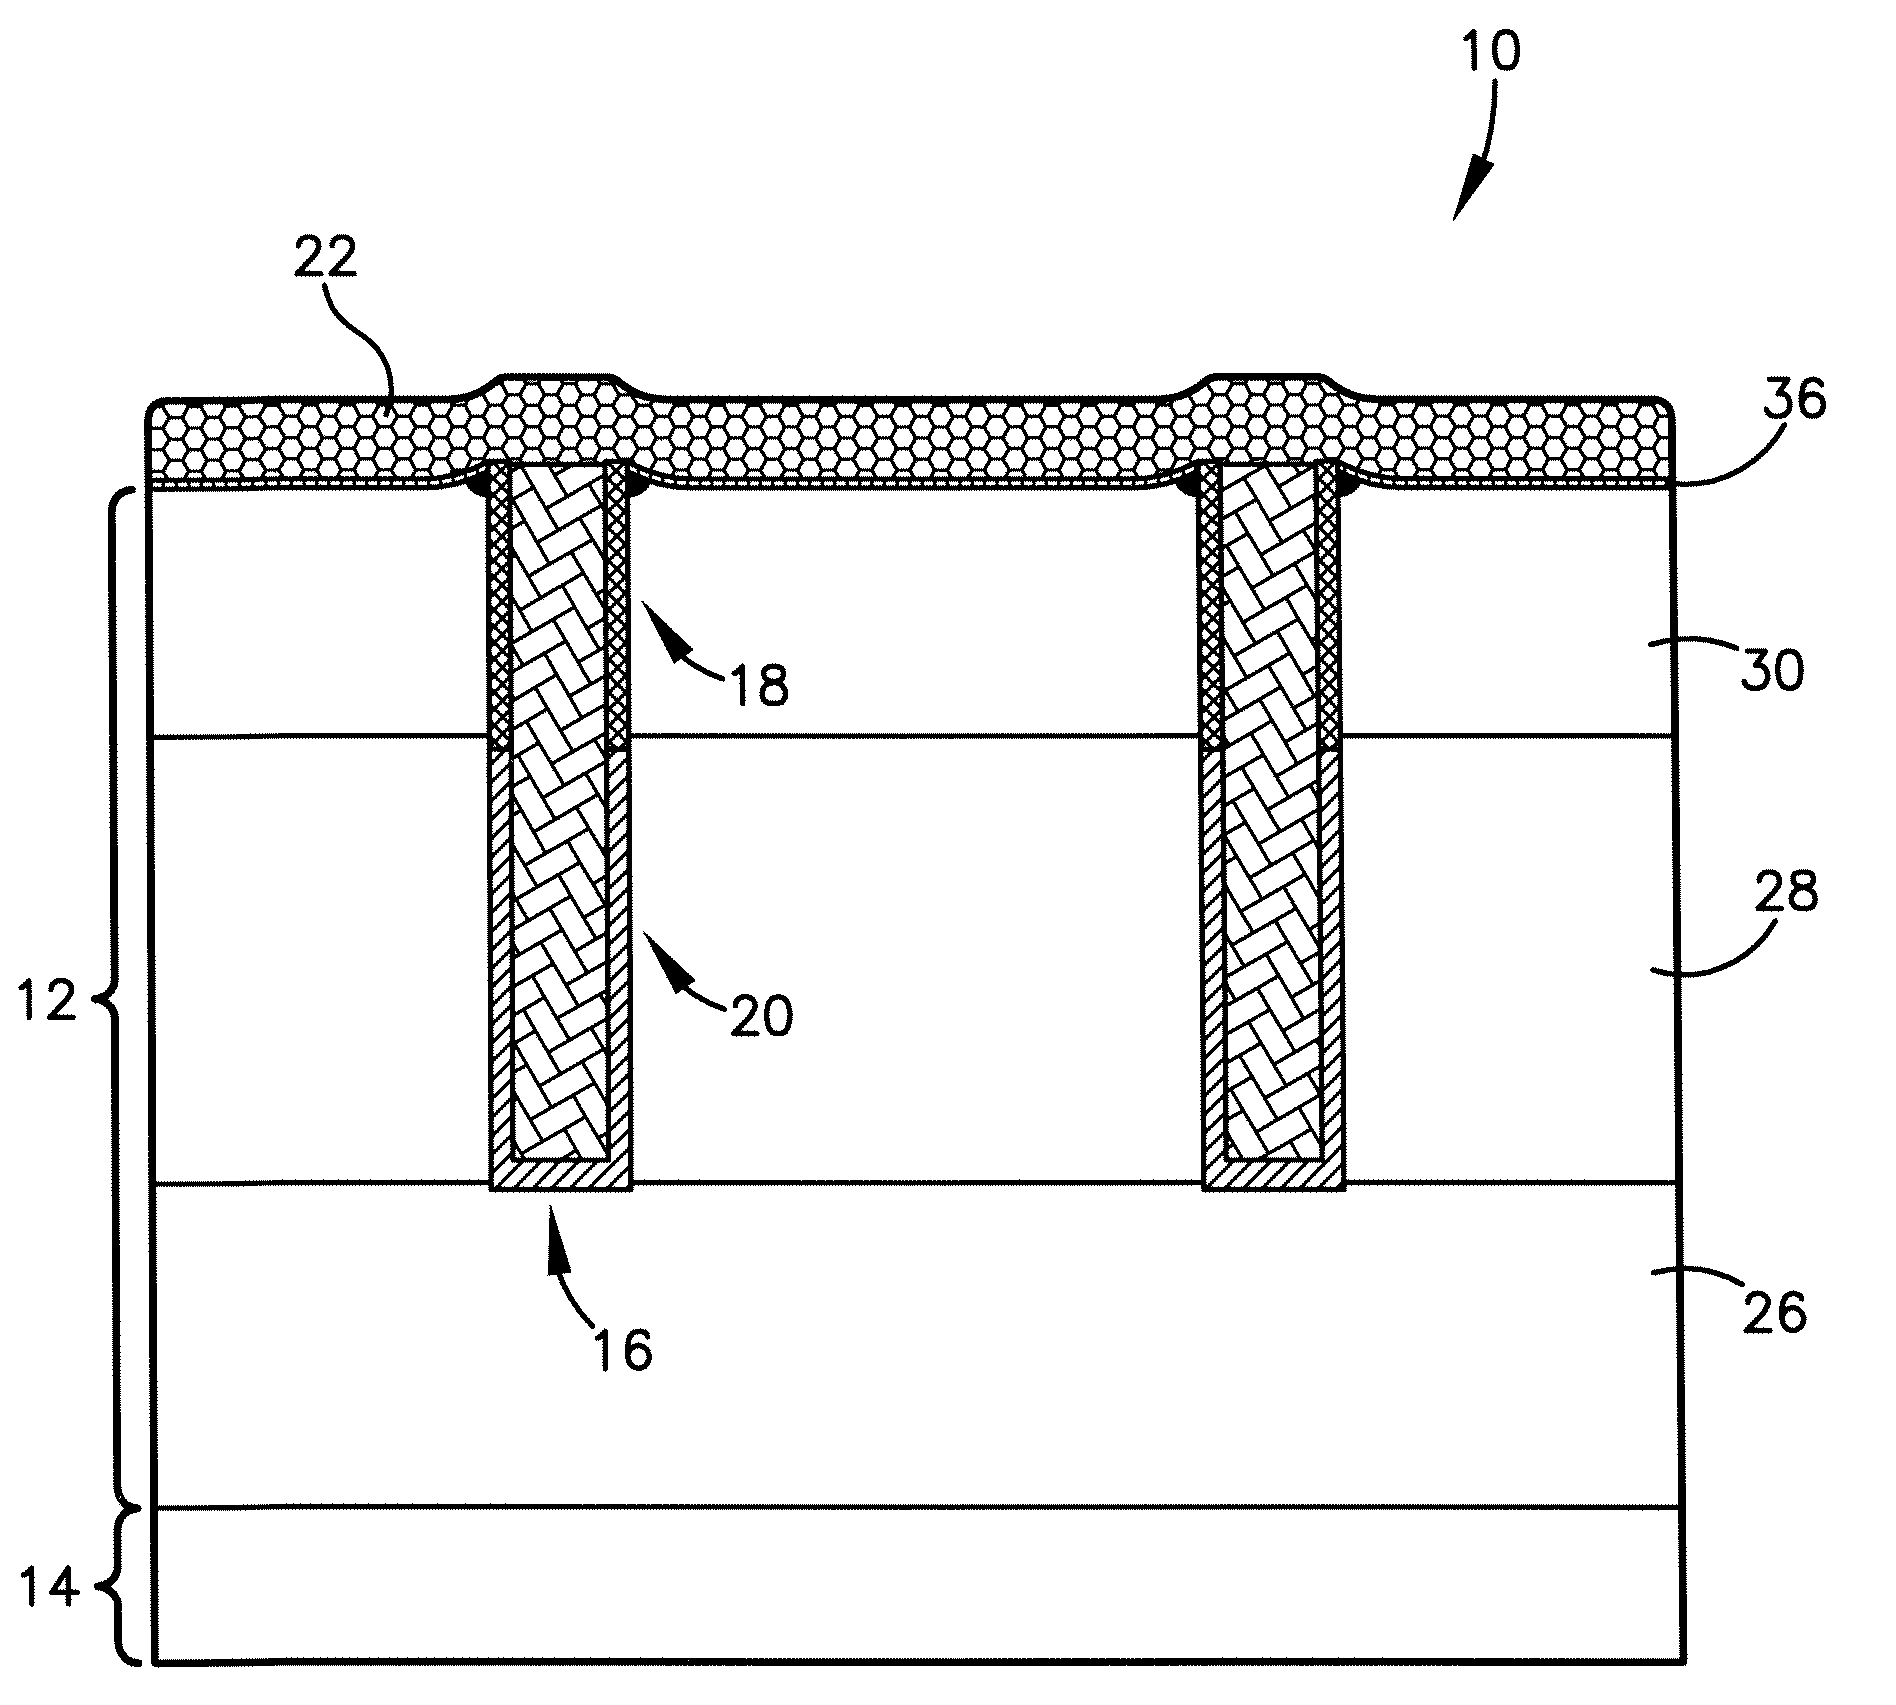 High-efficiency Schottky rectifier and method of manufacturing same